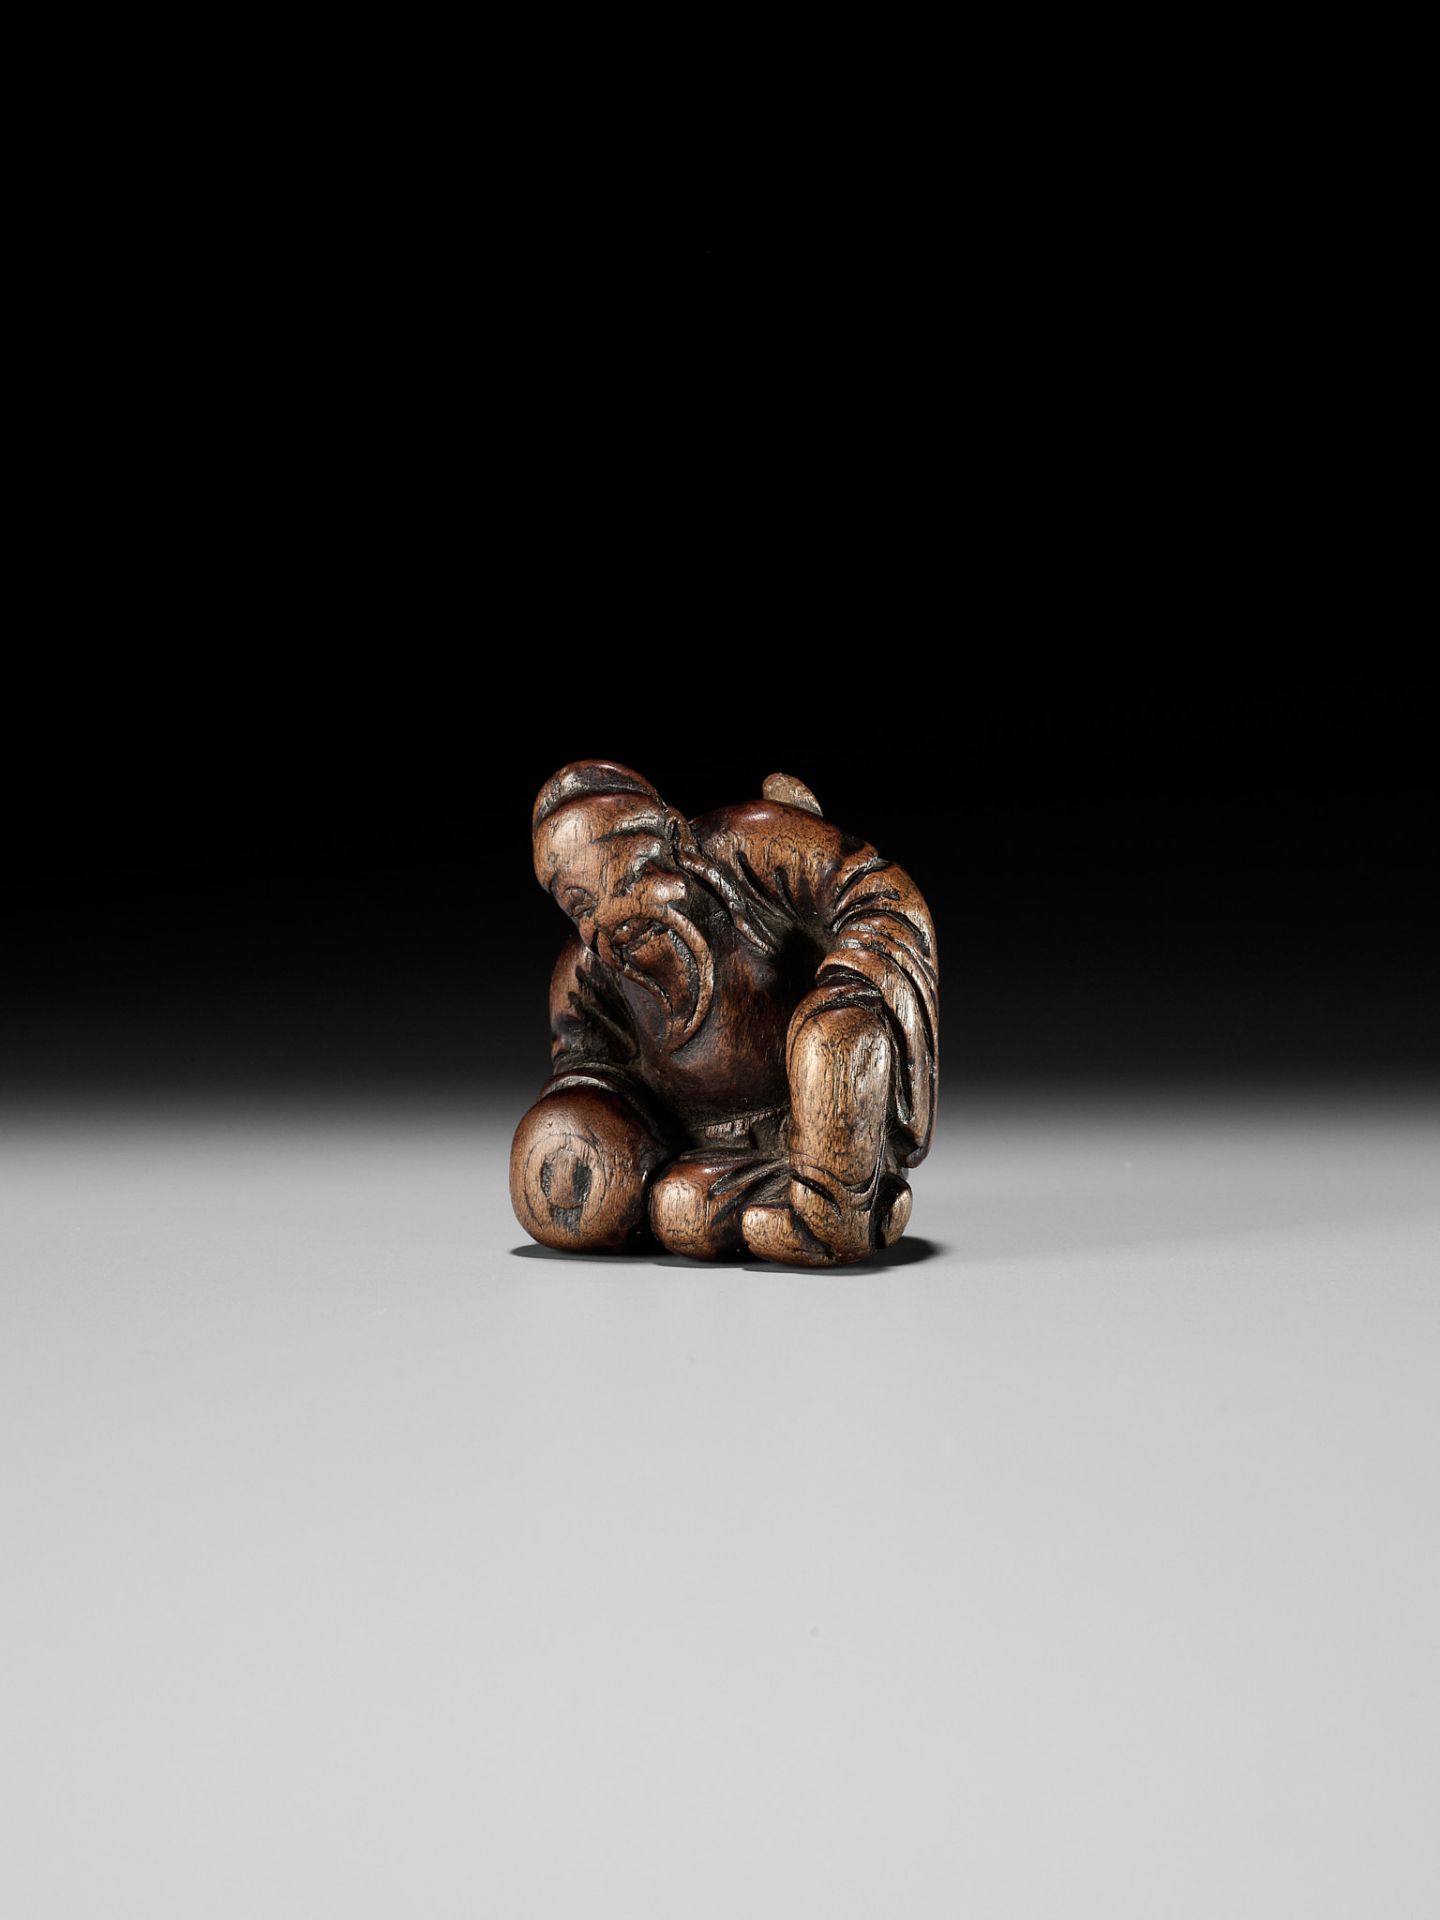 AN OLD WOOD NETSUKE OF A CHINESE SCHOLAR - Image 3 of 9